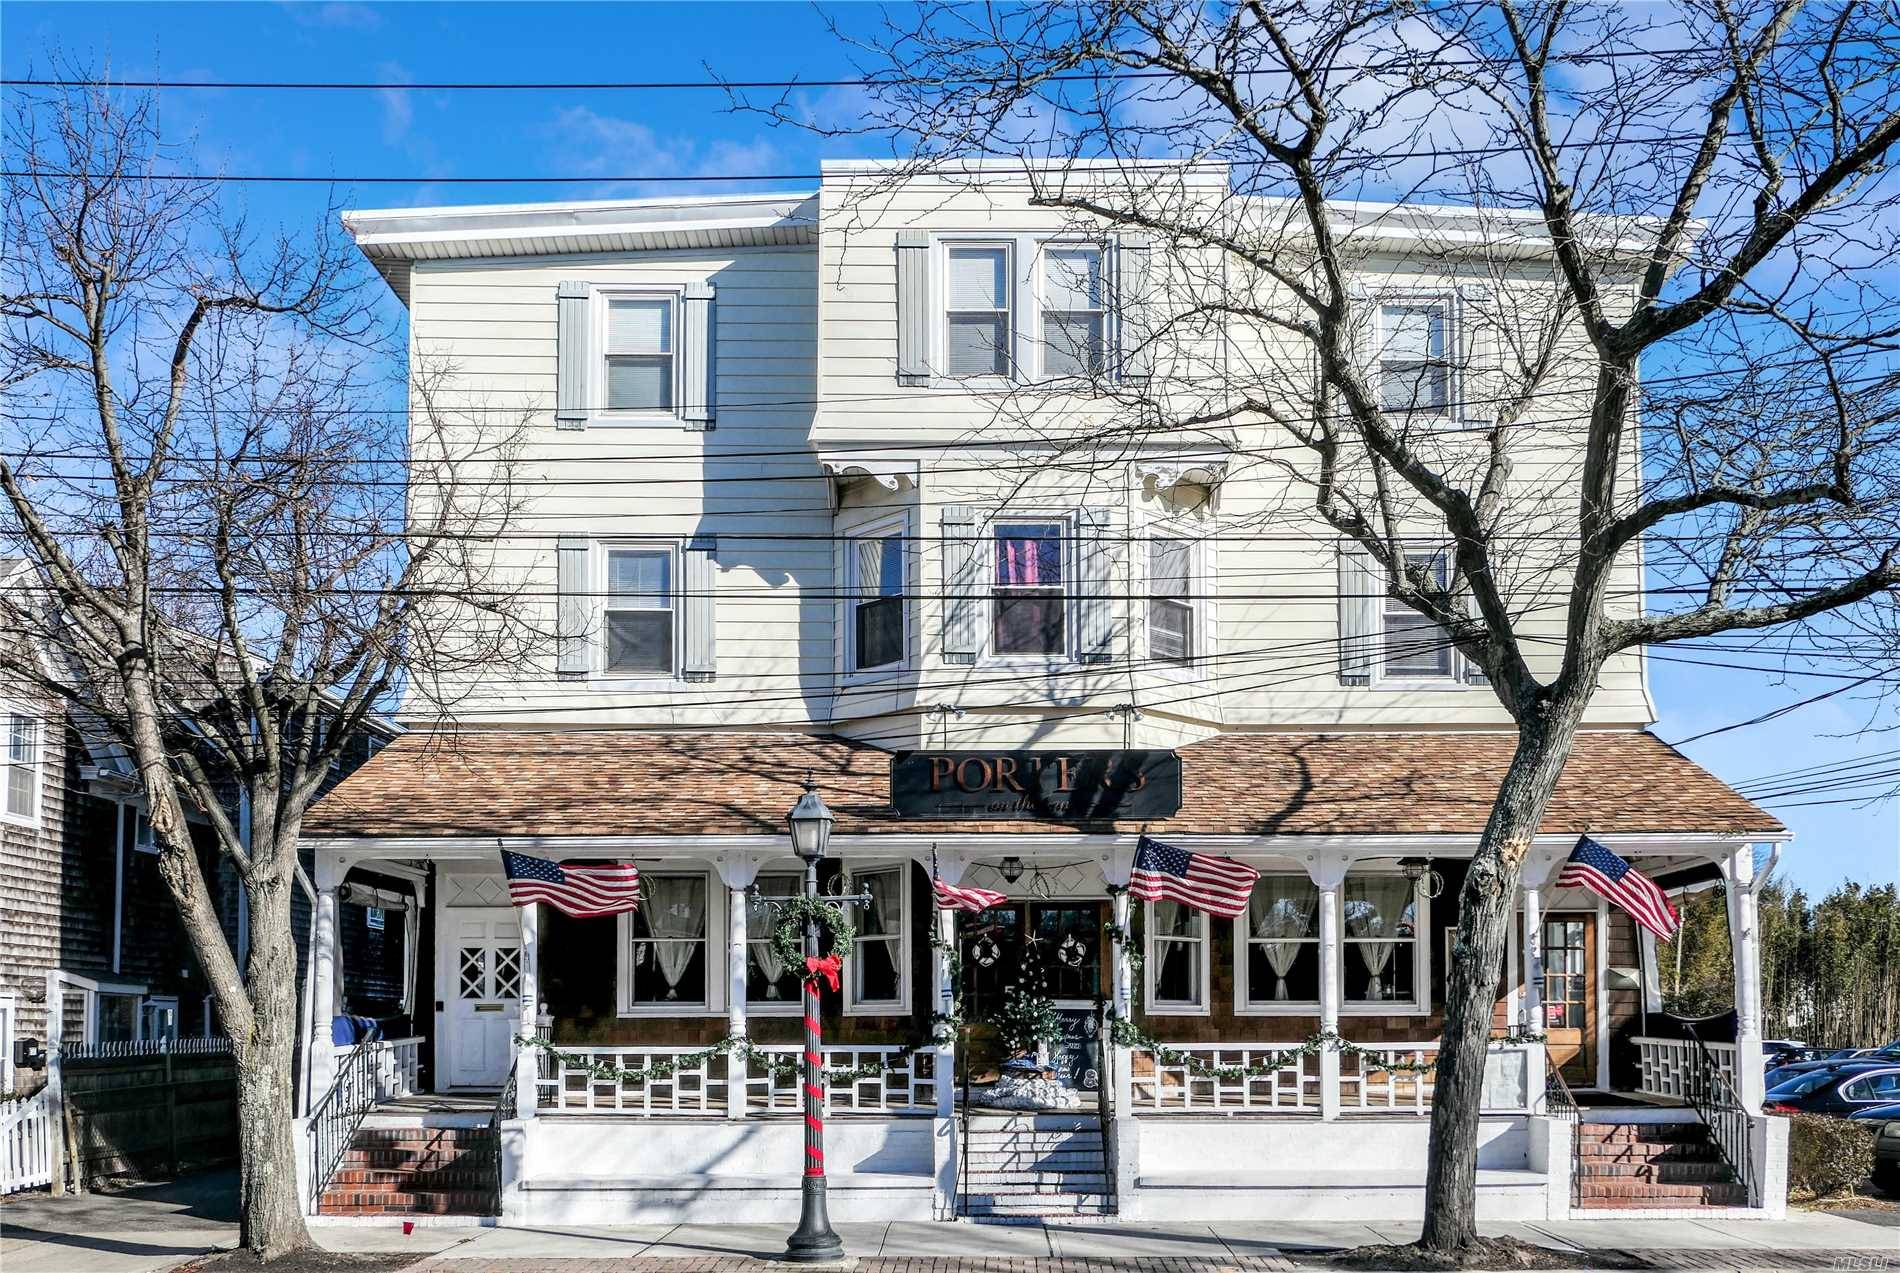 Offered Here Is A Rare Opportunity To Own A Profitable Investment Property In The Heart Of Bellport Village.